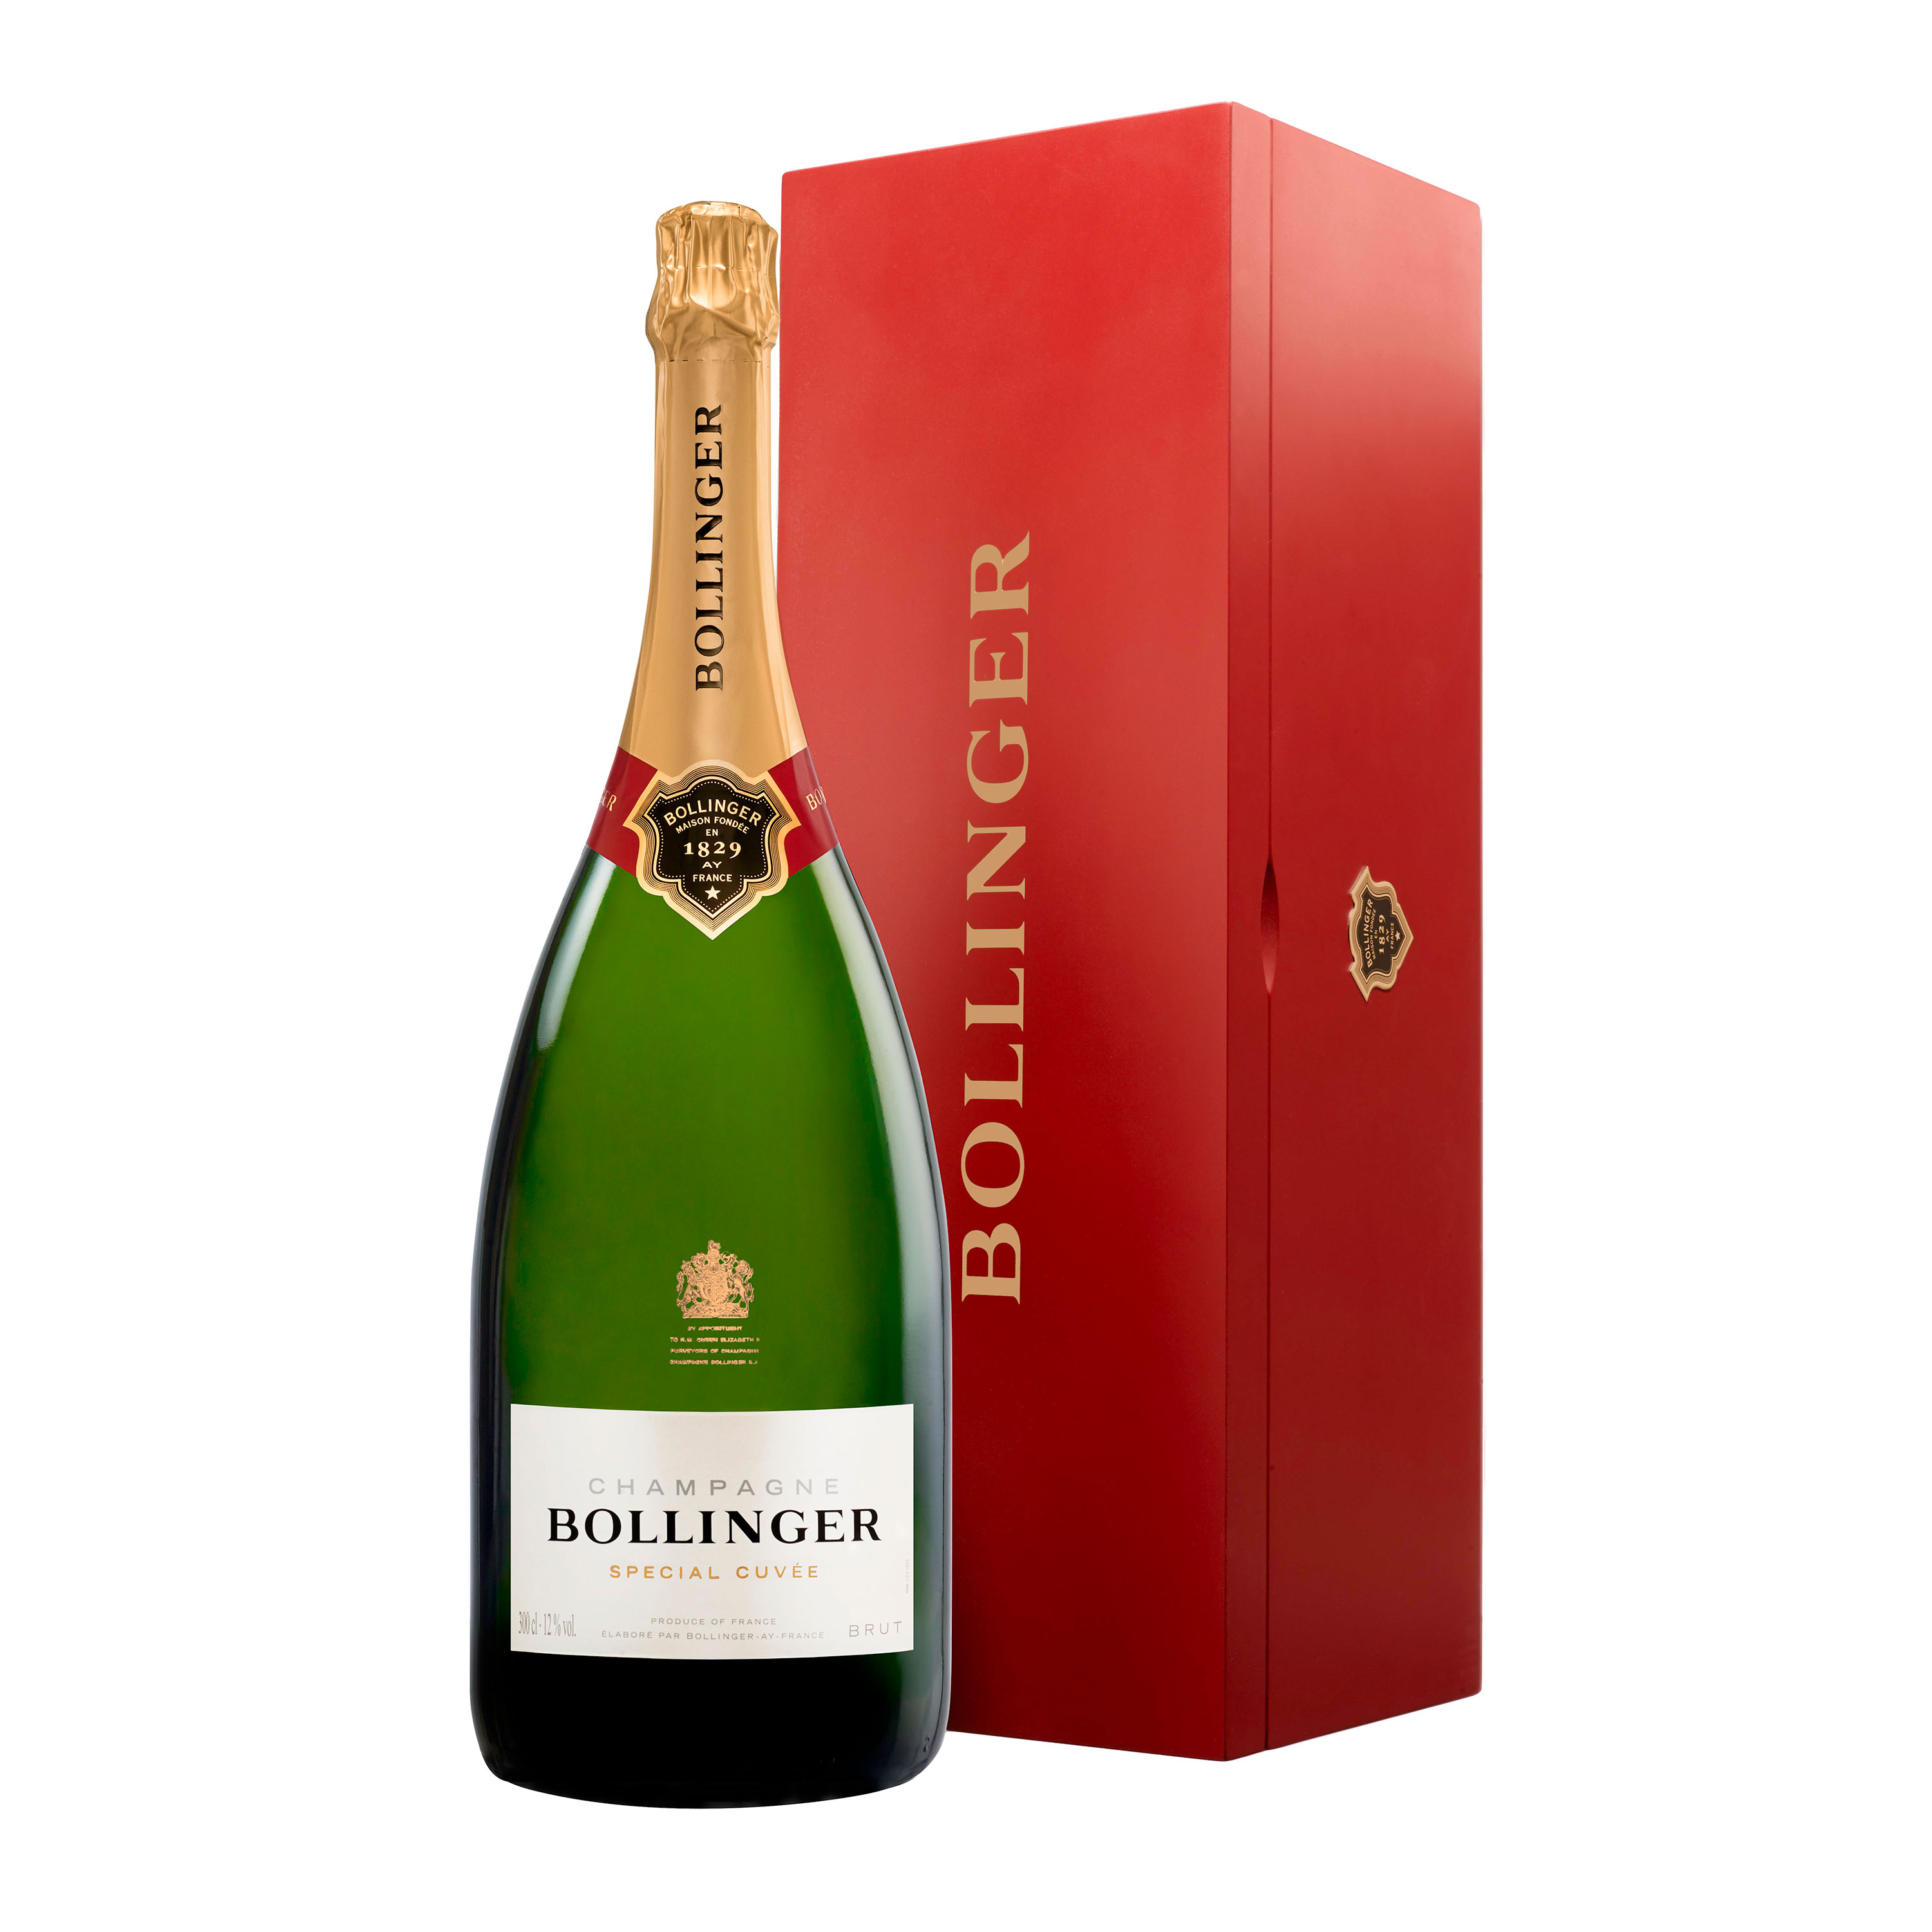 Jeroboam of Bollinger Special Cuvee NV Champagne